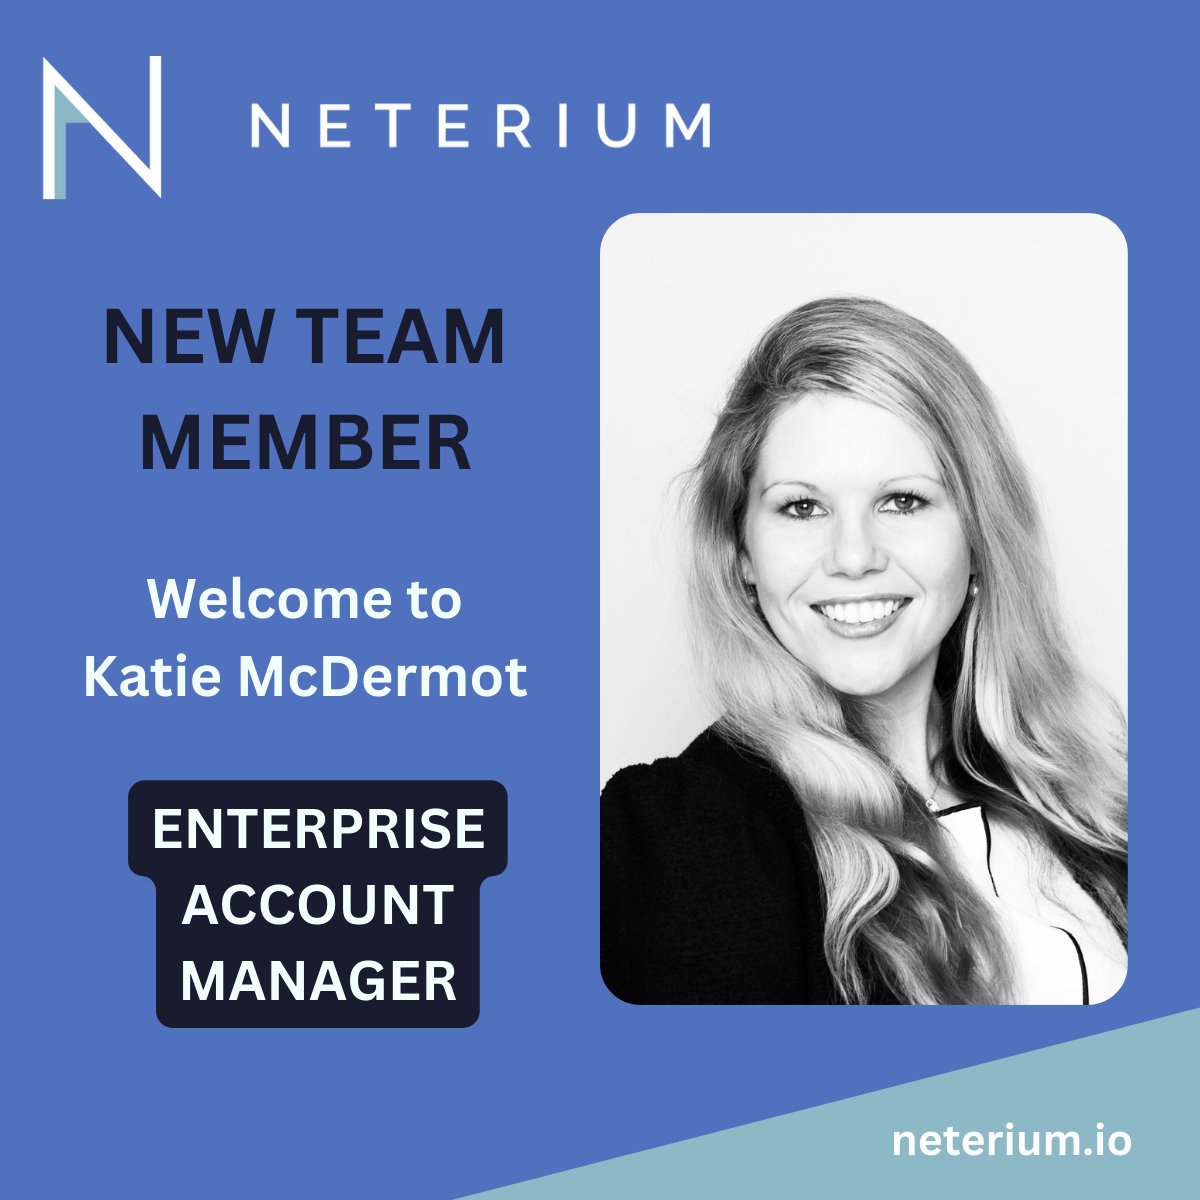 #NewTeamMember #WeAreGrowing 

We're delighted to introduce Katie McDermot as the newest member of our #Neterium family, stepping into the role of 𝐄𝐧𝐭𝐞𝐫𝐩𝐫𝐢𝐬𝐞 𝐀𝐜𝐜𝐨𝐮𝐧𝐭 𝐌𝐚𝐧𝐚𝐠𝐞𝐫. 

👉neterium.io/company/jobs/

#Fintech #Job #FCC #GlobalLeader